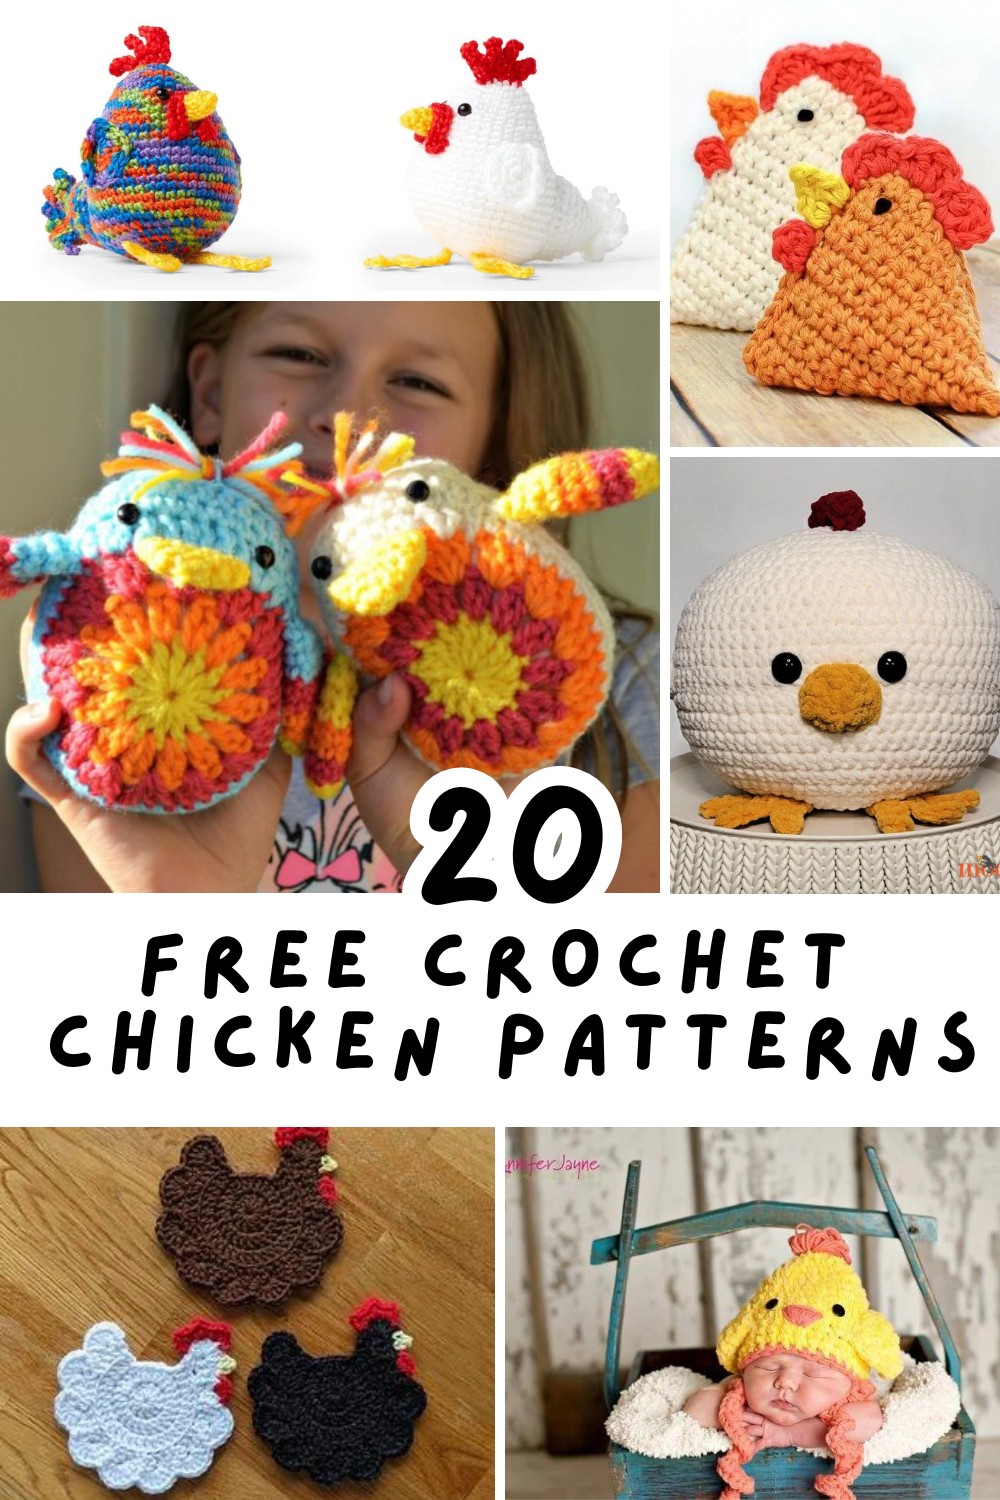 Discover the cutest free crochet chicken patterns! Perfect for beginners and seasoned crafters alike, these patterns will add a touch of charm to your home decor or make delightful gifts. Get started on your next crochet project today! #CrochetPatterns #DIYCrafts 🐔🧶